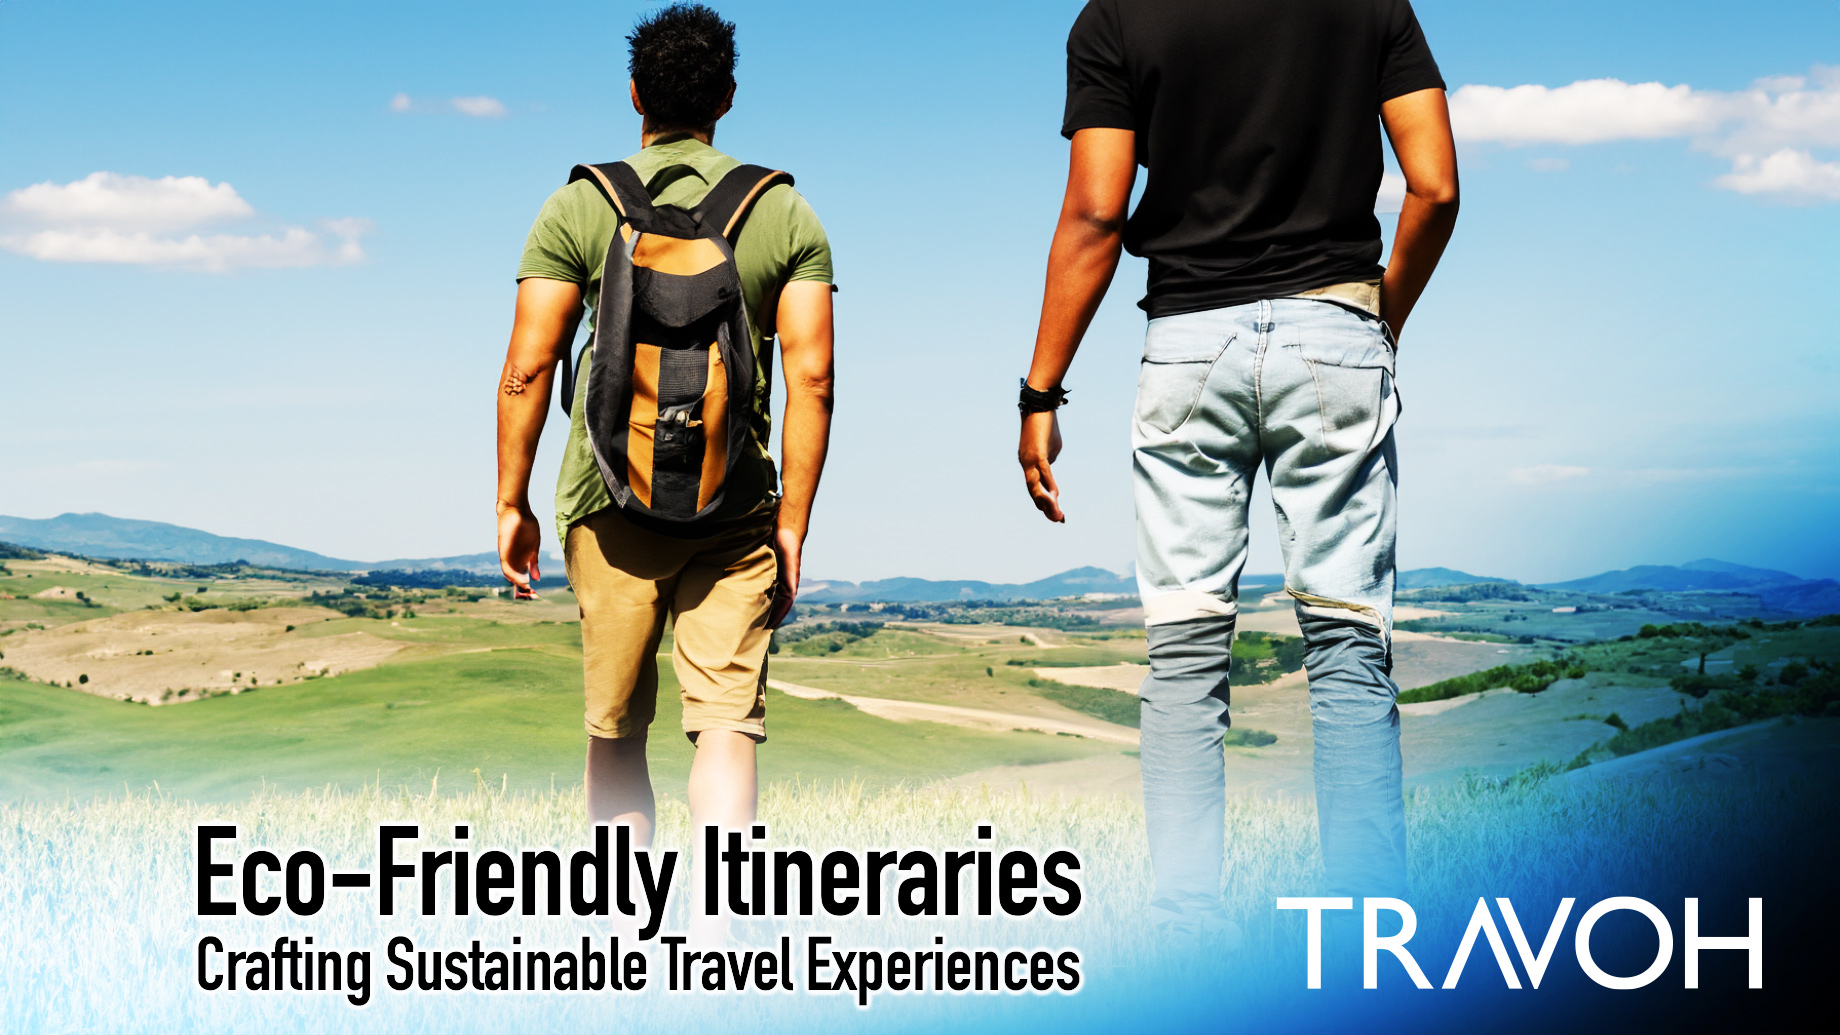 Eco-Friendly Itineraries - Crafting Sustainable Travel Experiences